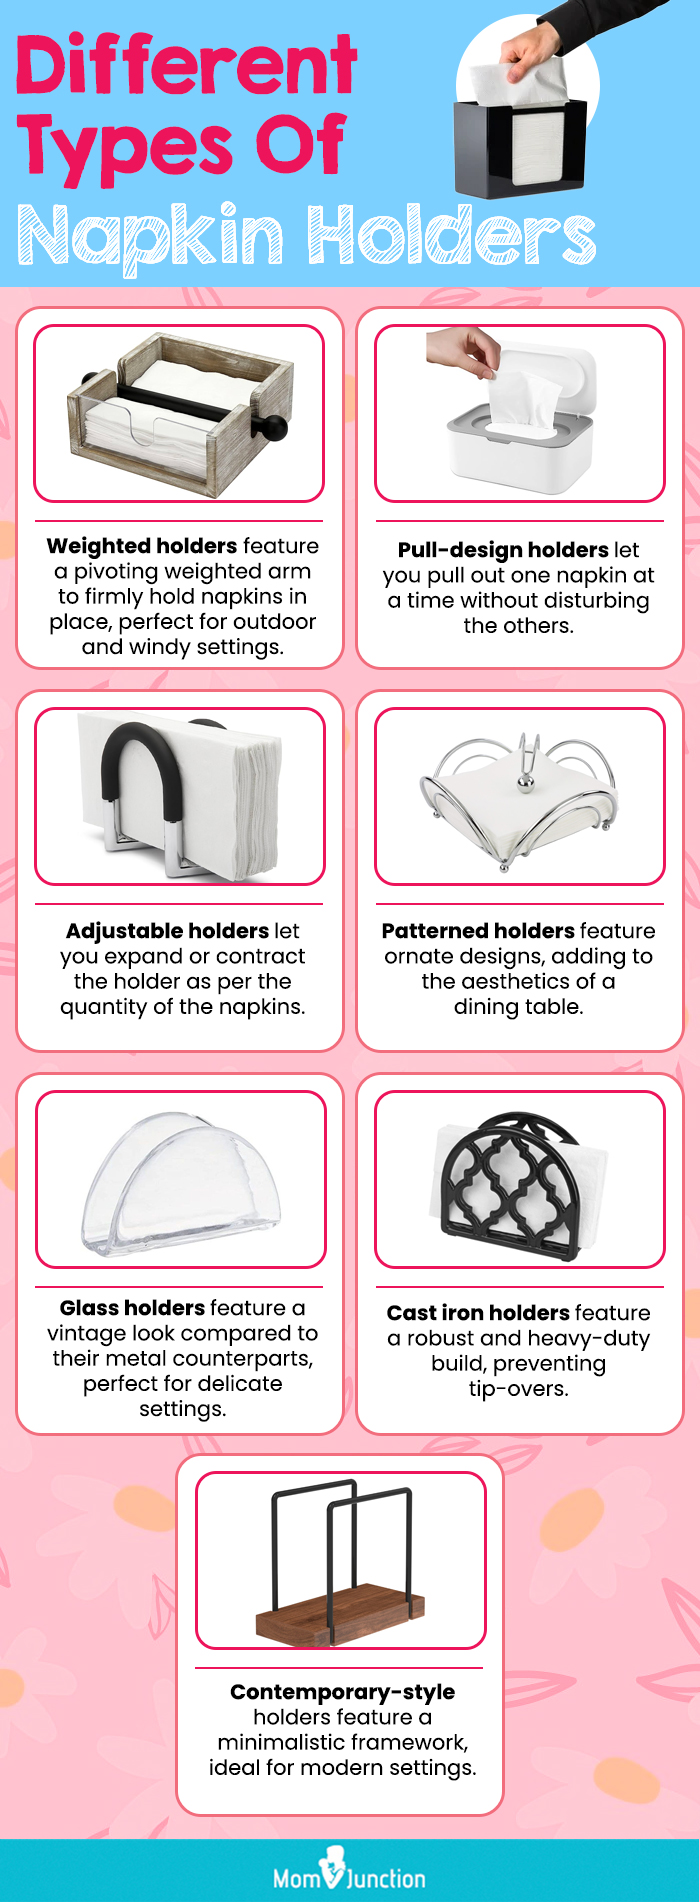 Different Types Of Napkin Holders (infographic)